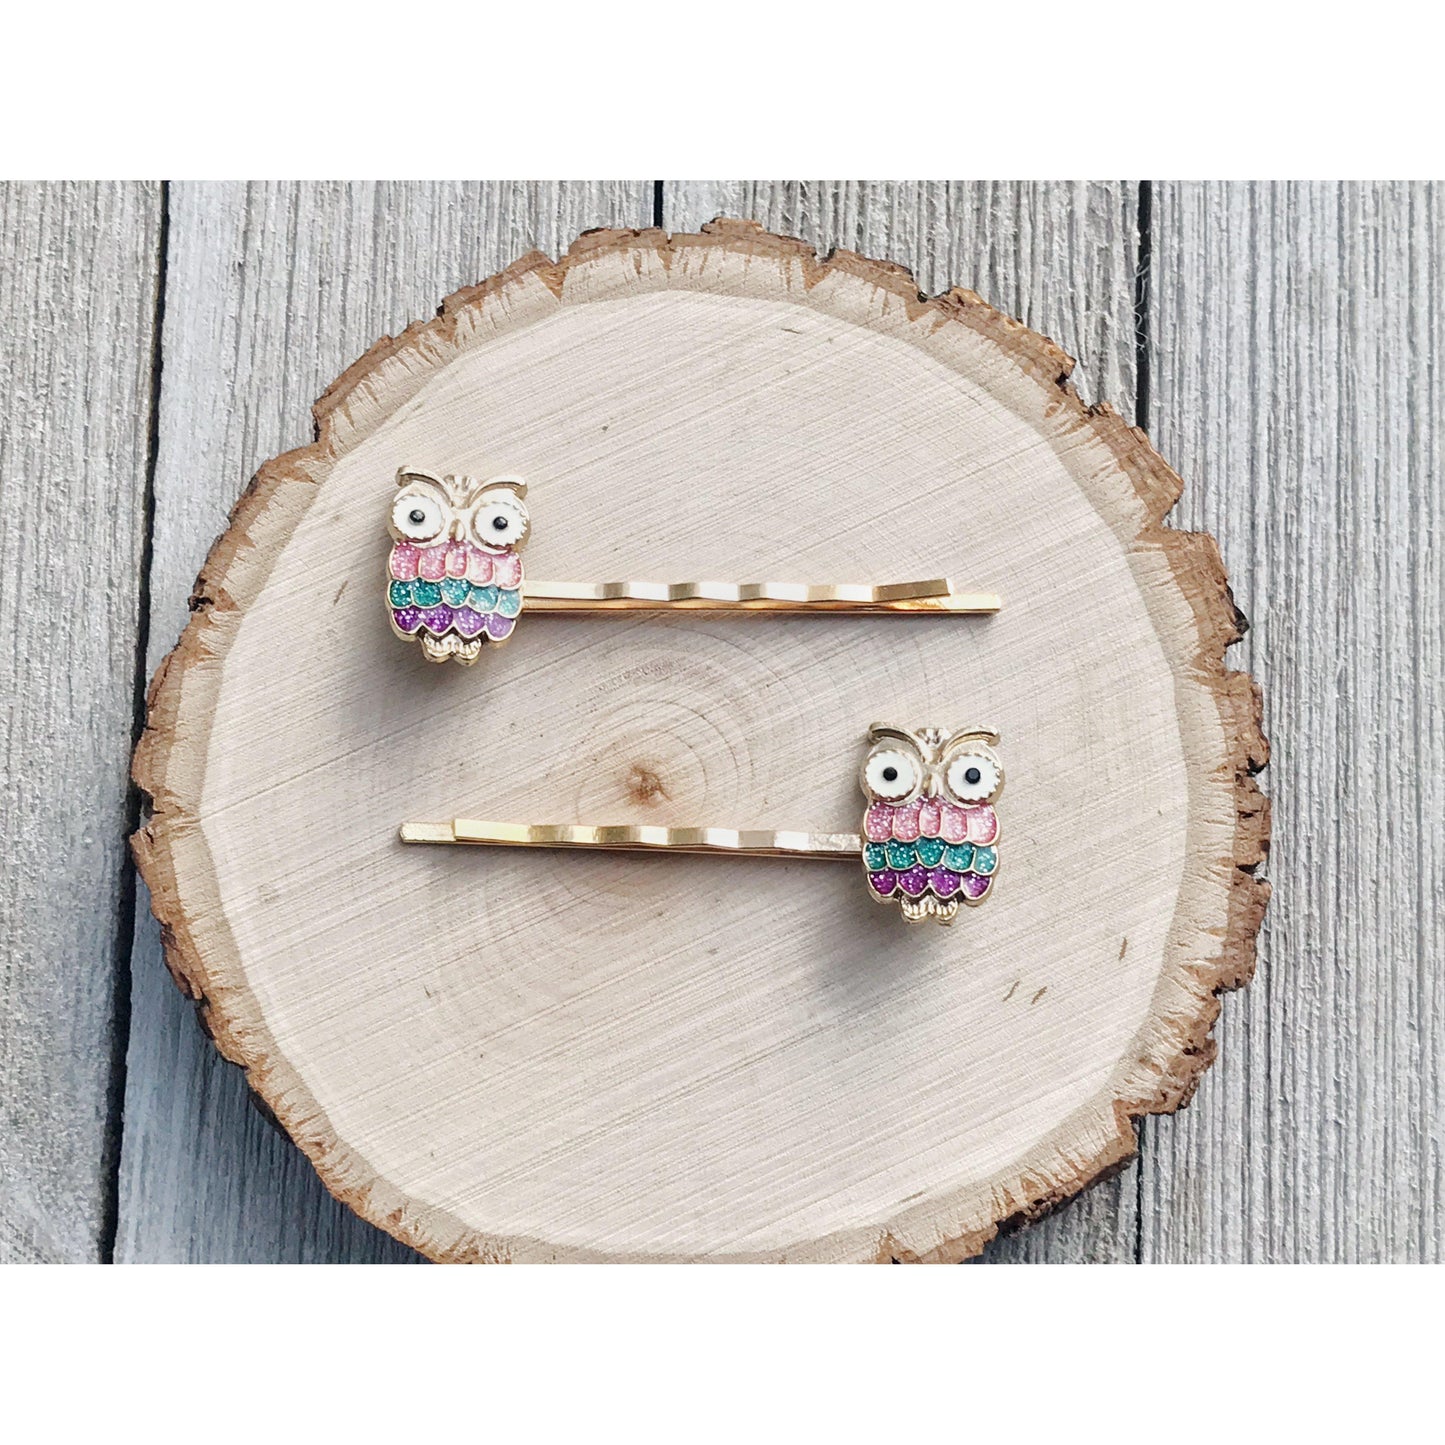 Pastel Owl Bobby Pins: Sparkling Owl Accents for Unique Hairstyles